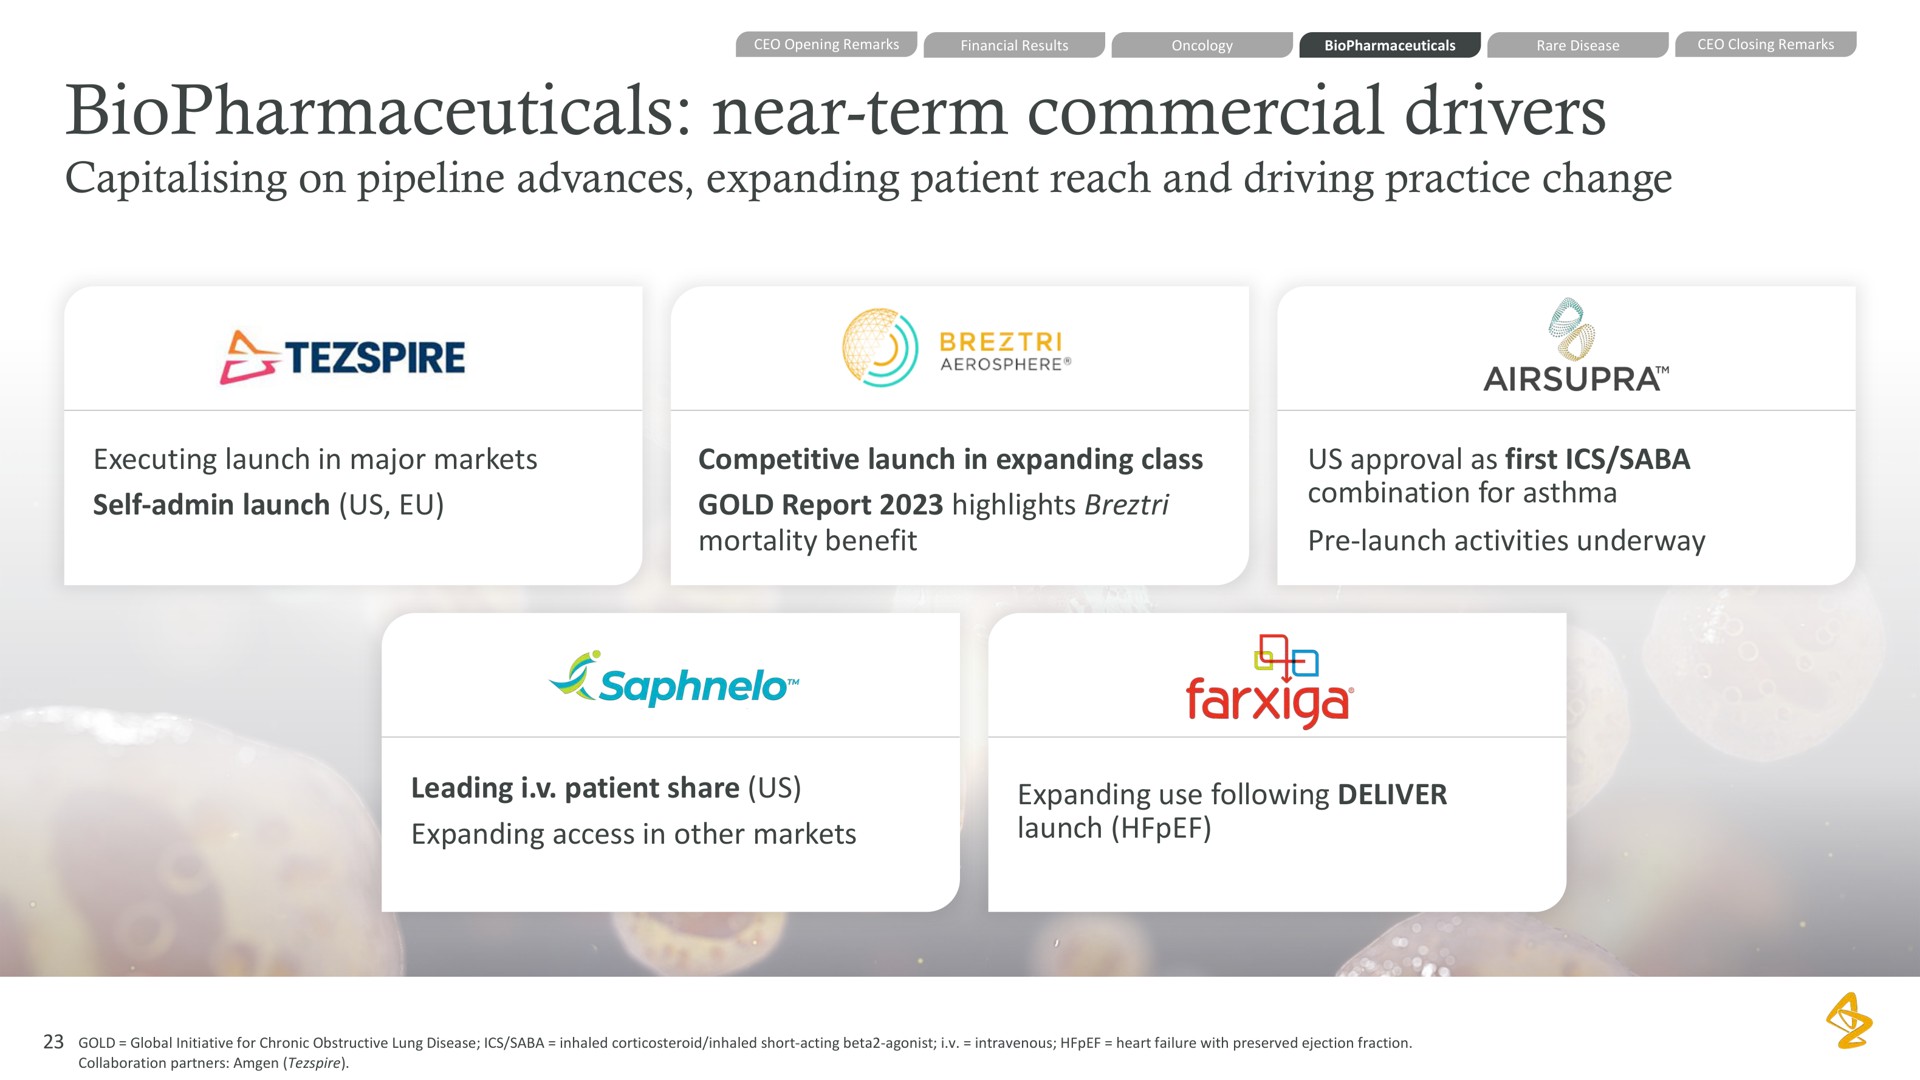 near term commercial drivers on pipeline advances expanding patient reach and driving practice change executing launch in major markets self launch us competitive launch in expanding class gold report highlights mortality benefit us approval as first combination for asthma launch activities underway leading i patient share us expanding access in other markets expanding use following deliver launch | AstraZeneca